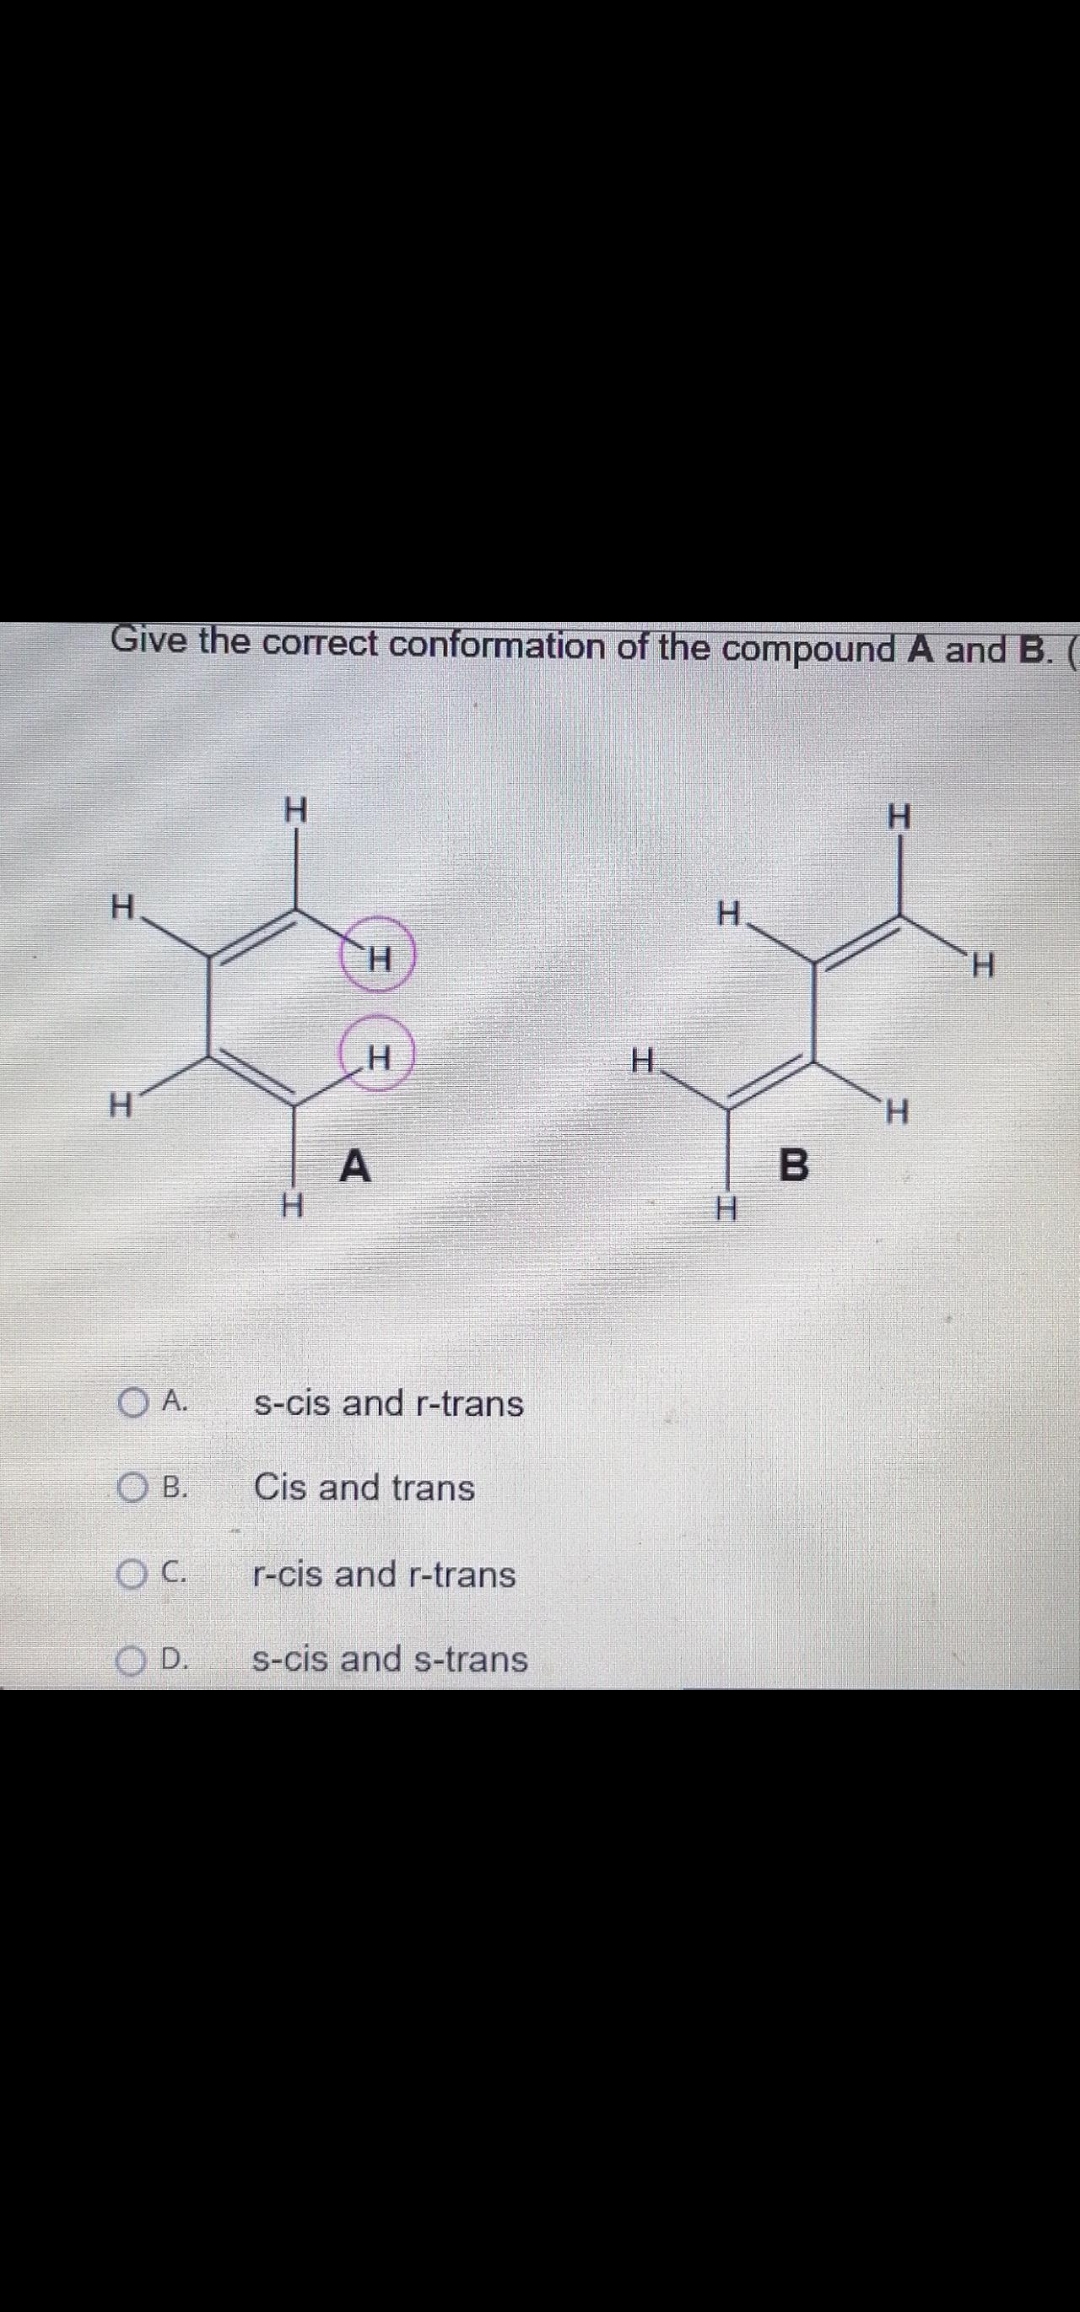 Give the correct conformation of the compound A andB.
H.
H.
H.
H.
H.
H.
H.
H.
A
O A.
s-cis and r-trans
O B.
Cis and trans
O C.
r-cis and r-trans
O D.
s-cis and s-trans
